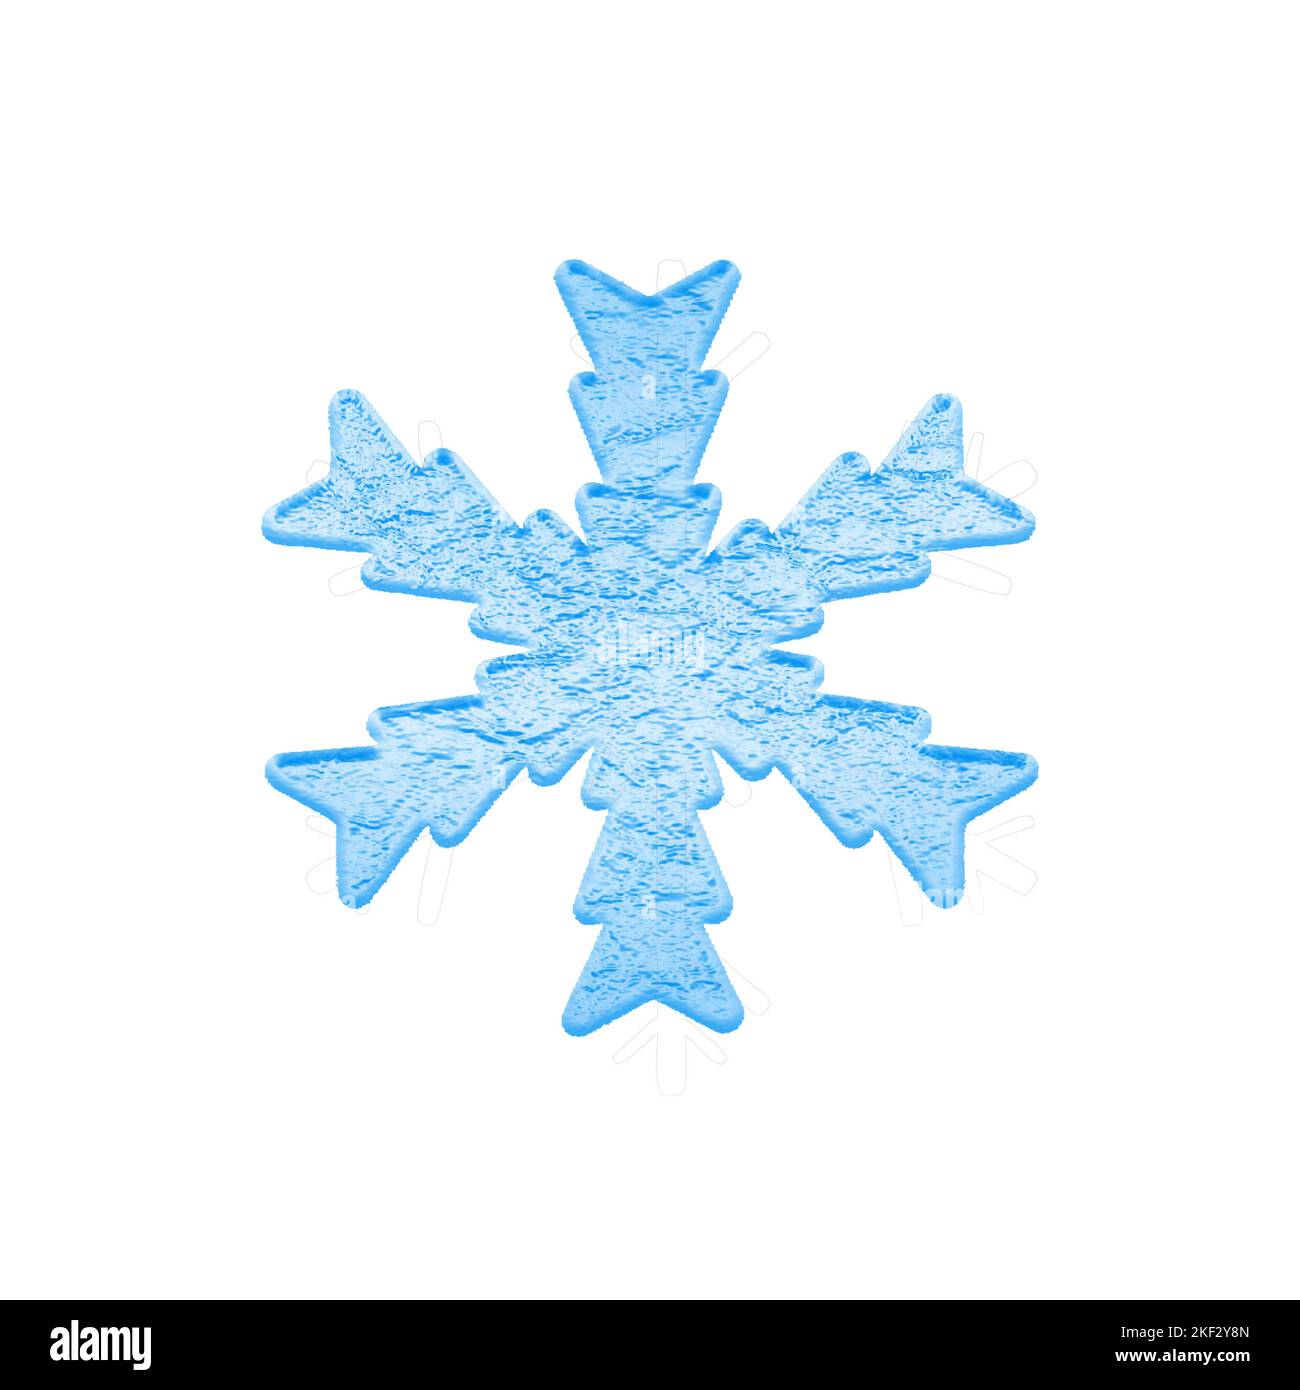 Digitally created winter snowflakes isolated on white background. Stock Photo